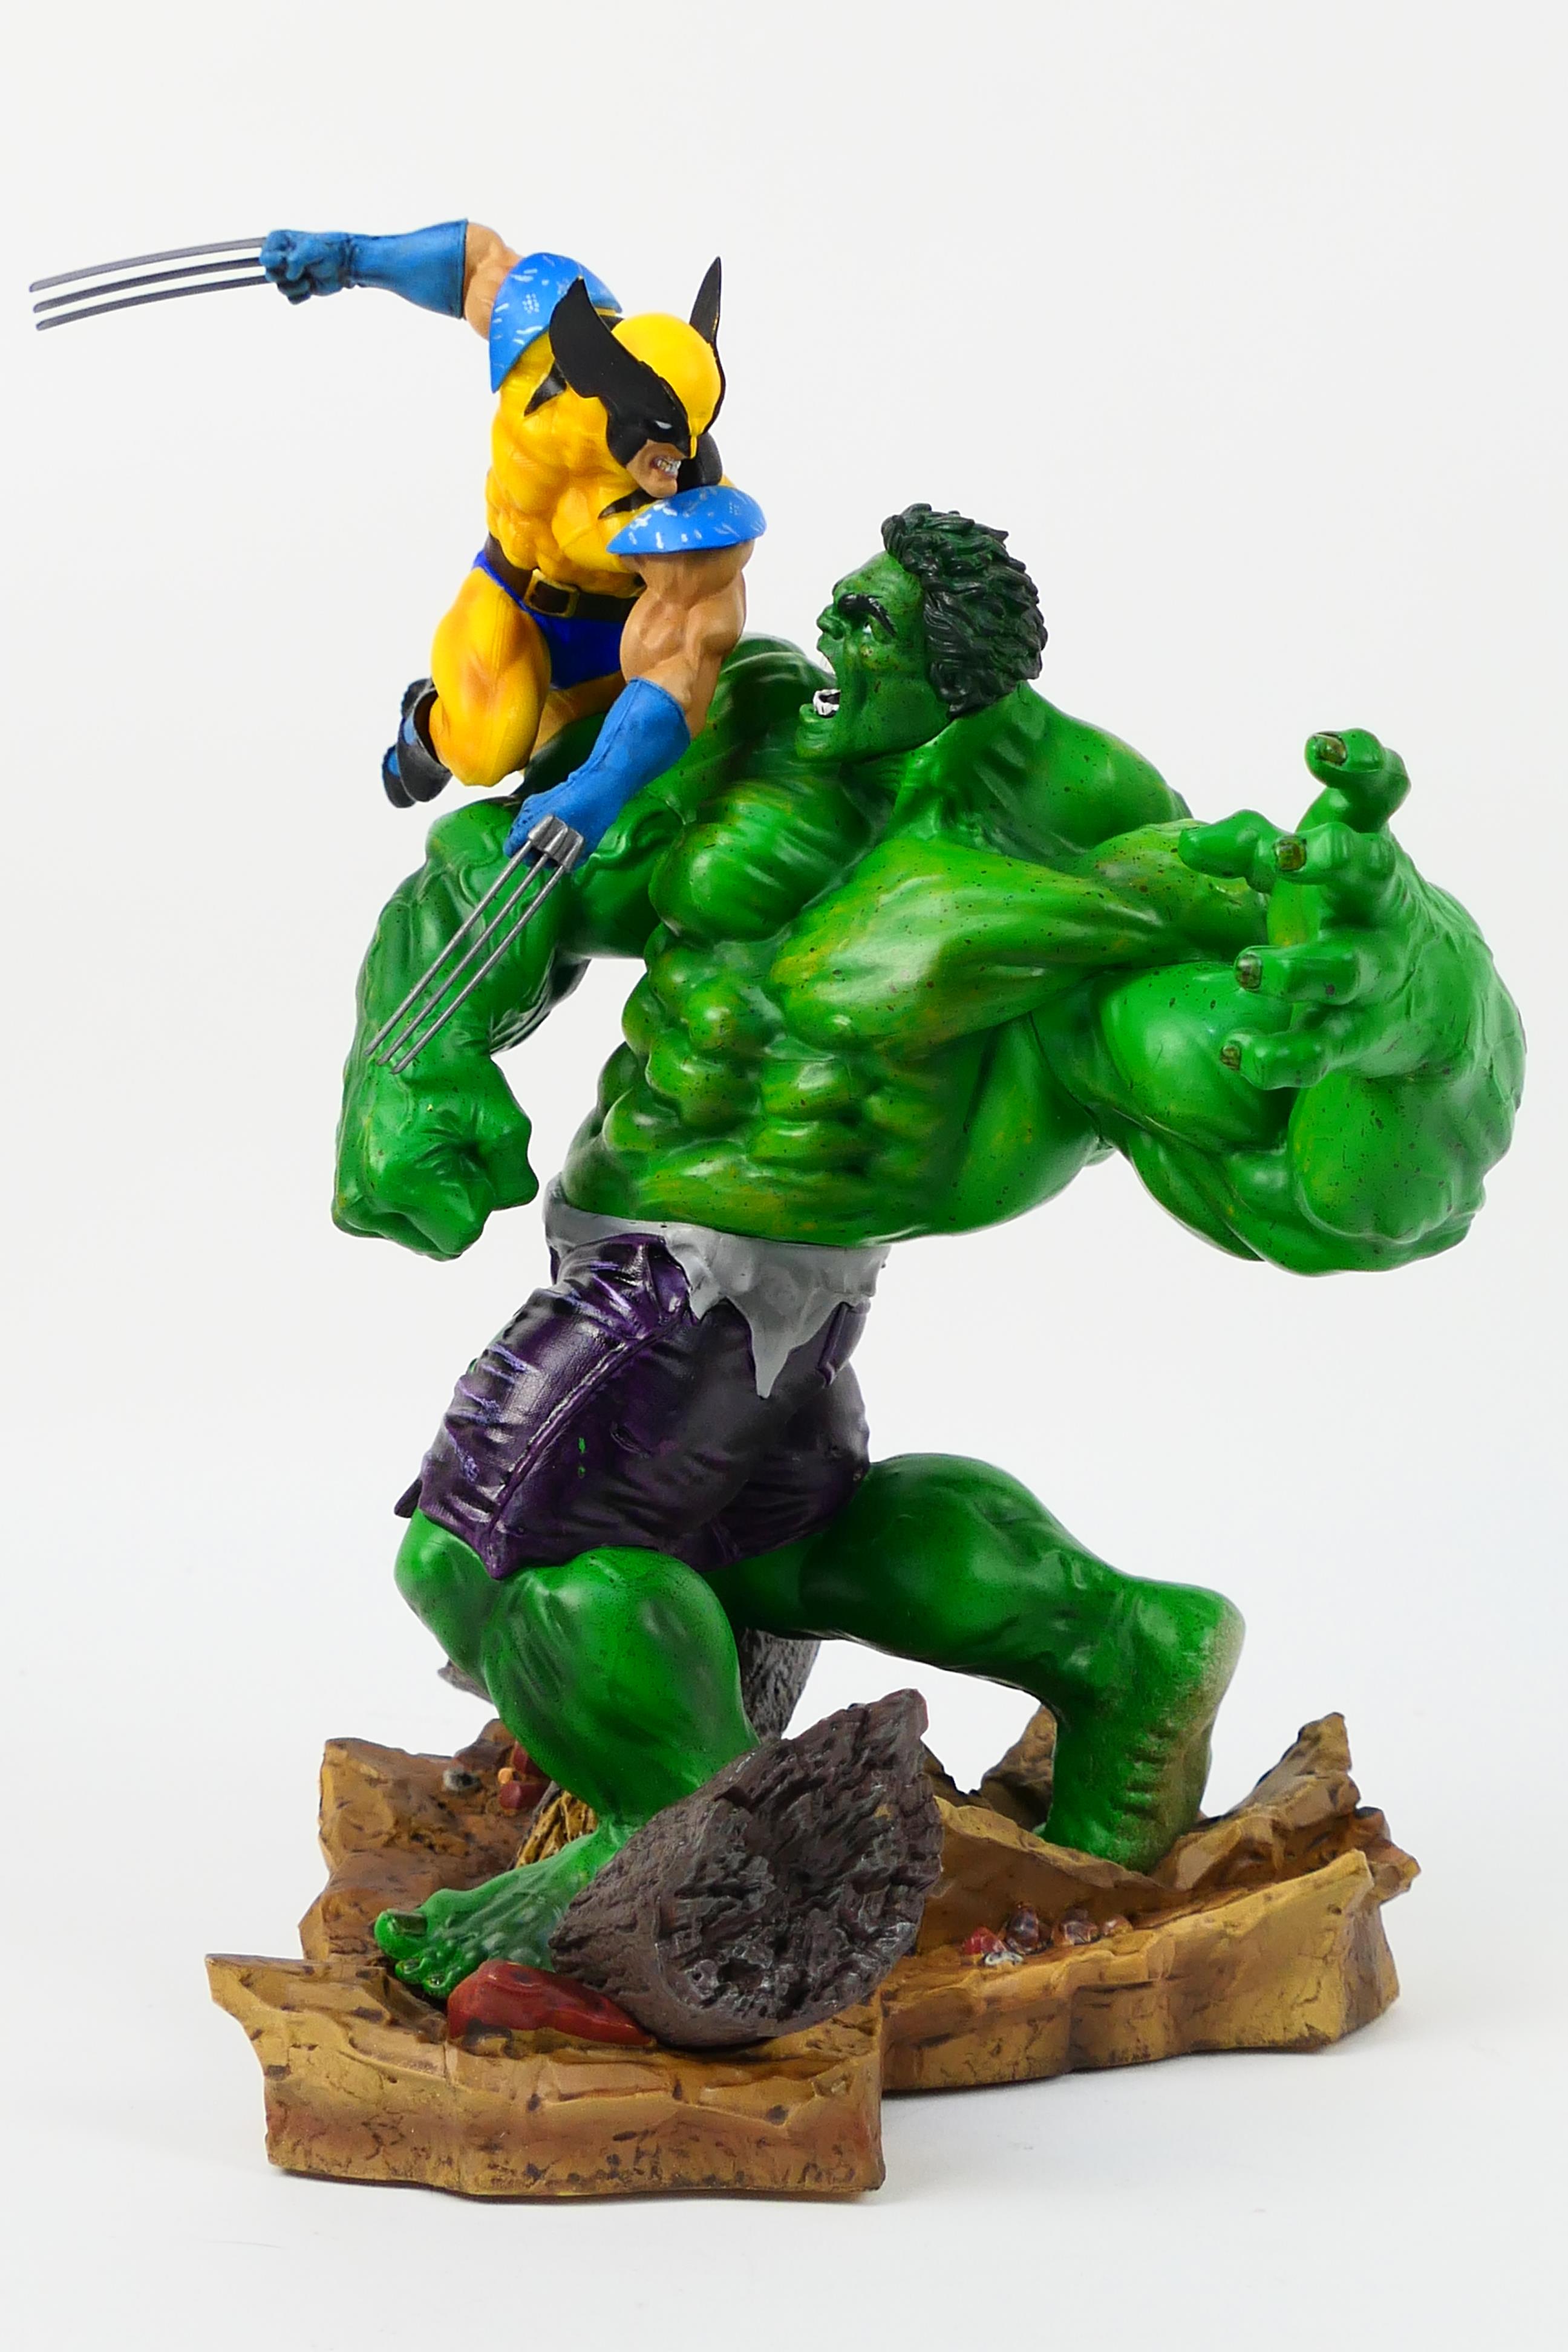 Tianbaotoys - Marvel - A boxed Hulk vs. Wolverine statue which is approximately 12 inches tall. - Image 5 of 6